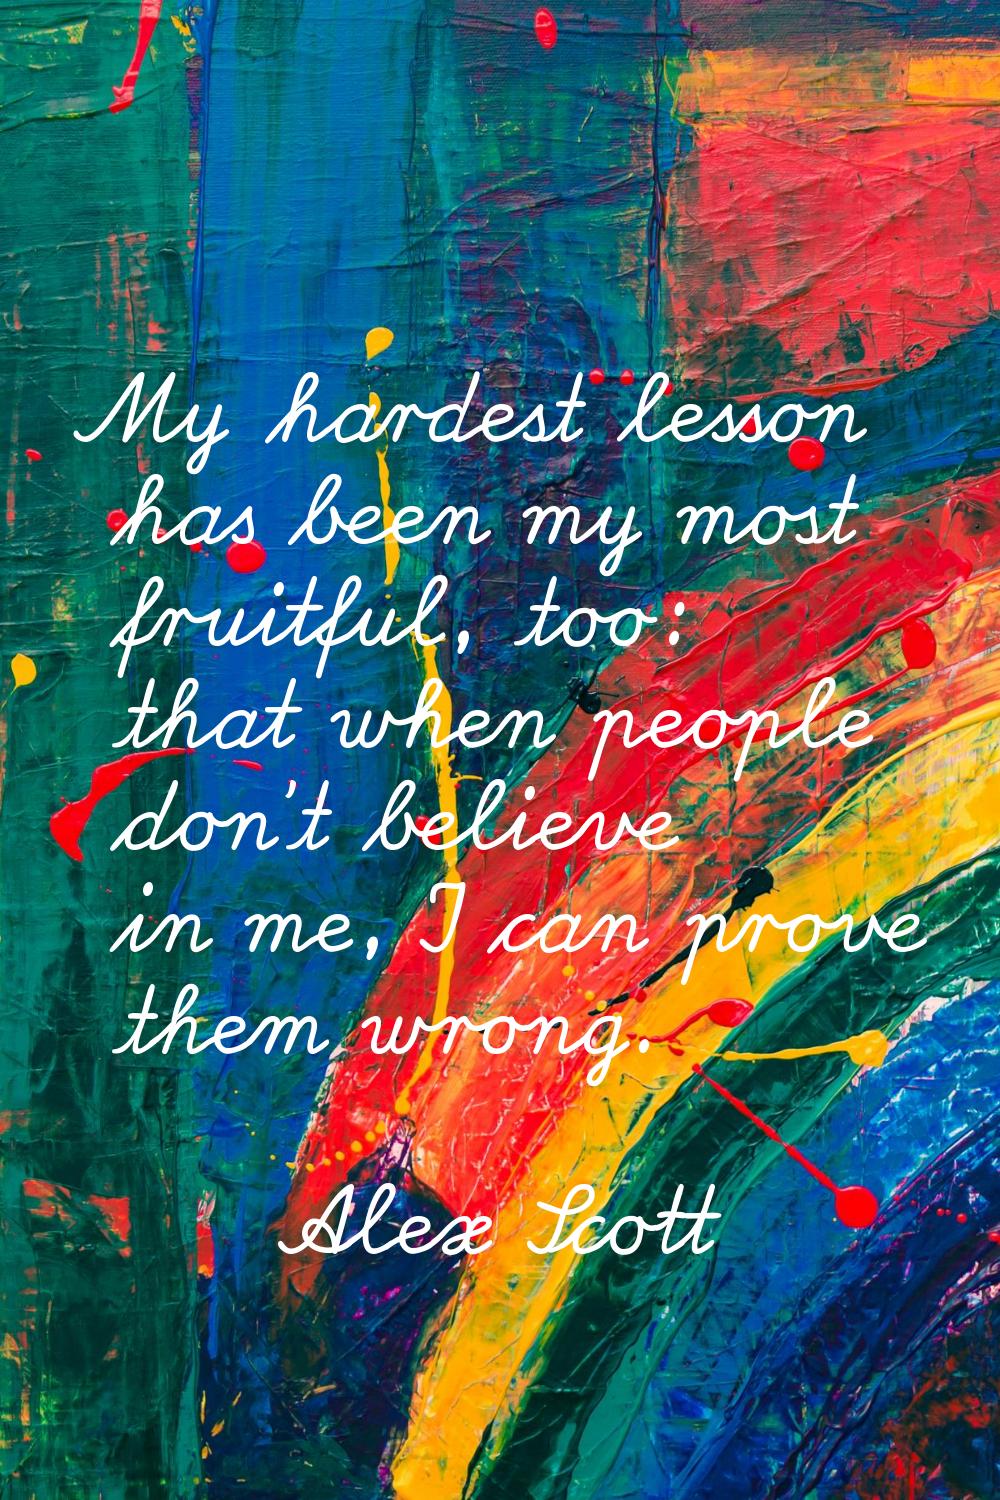 My hardest lesson has been my most fruitful, too: that when people don't believe in me, I can prove